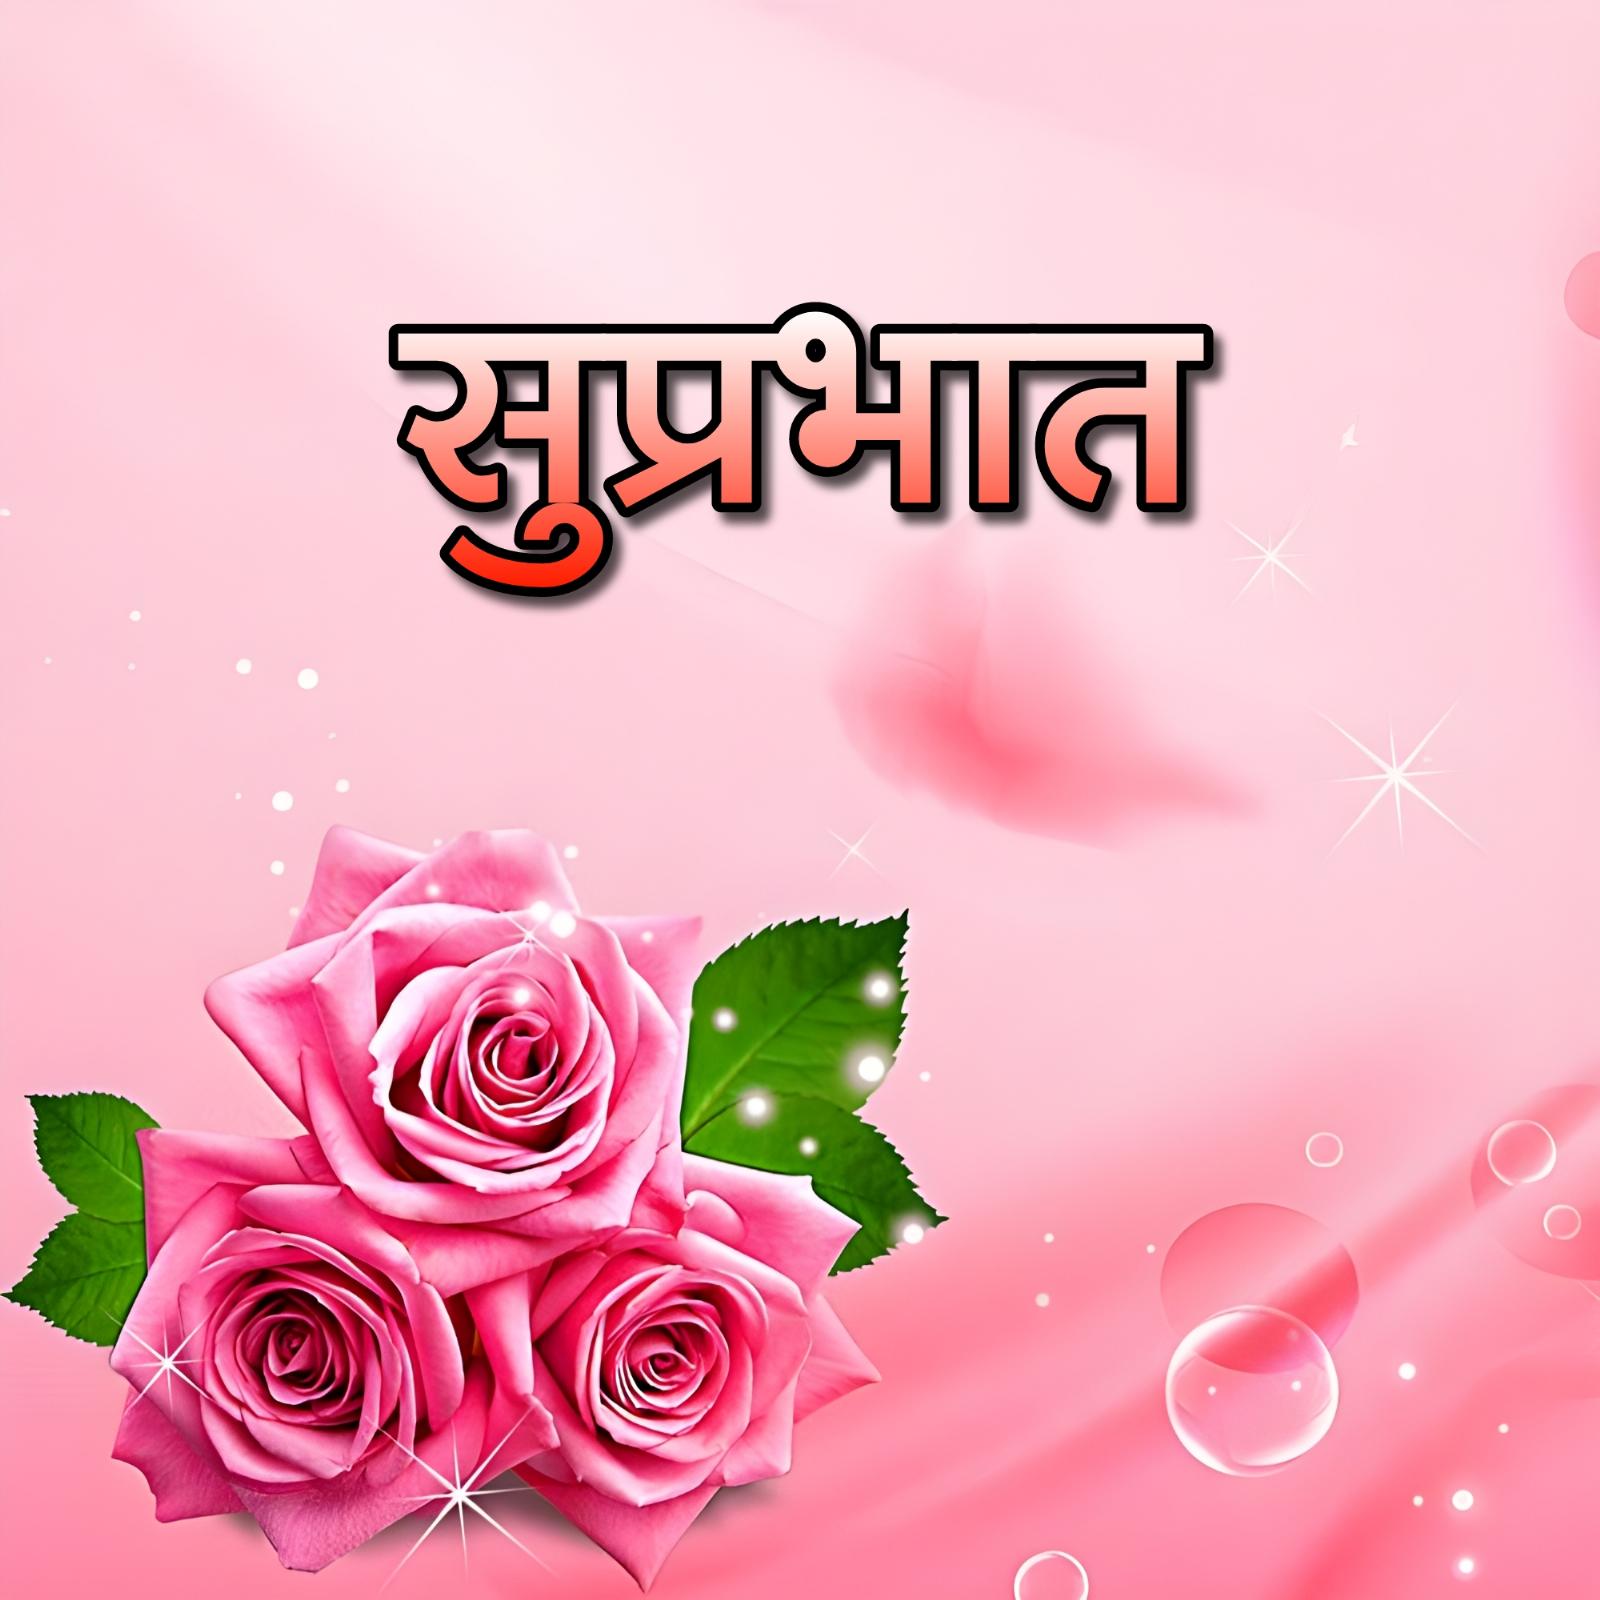 Suprabhat With The Flower Images